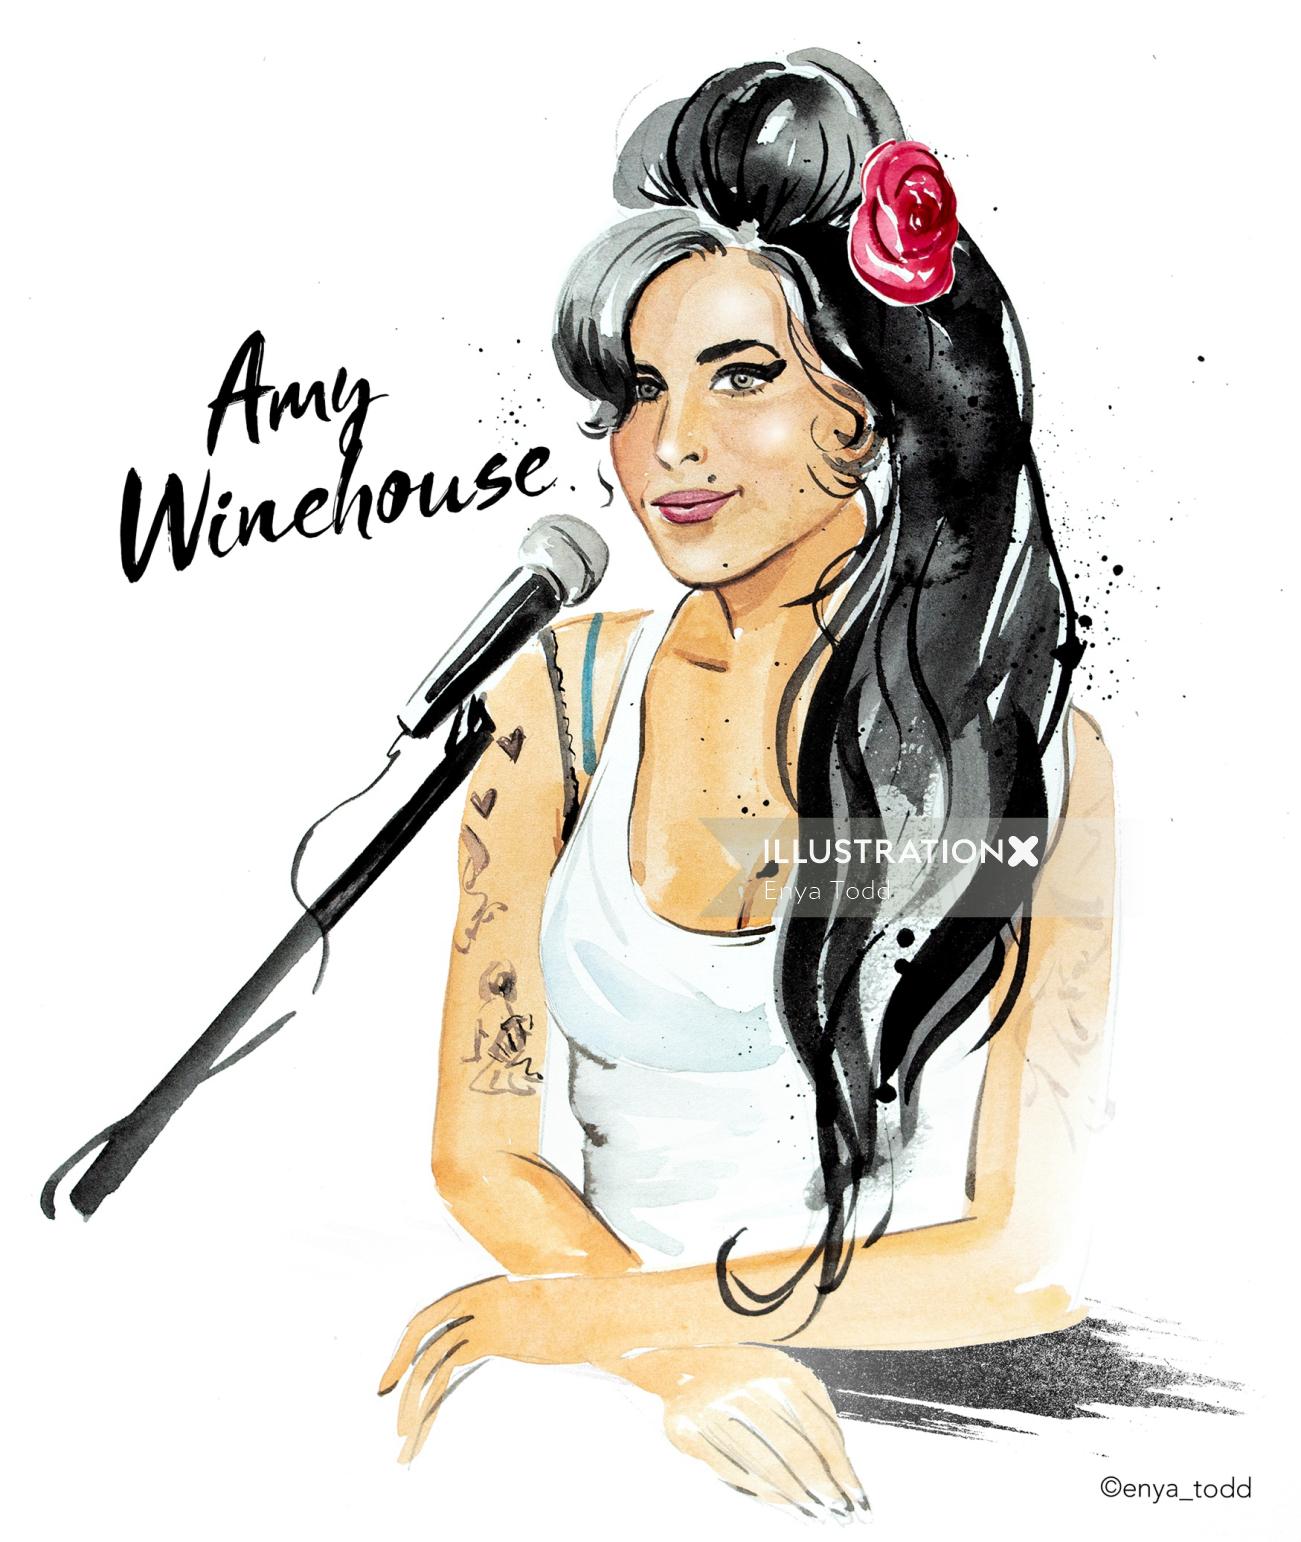 Portrait of a Amy Winehouse, English singer-songwriter